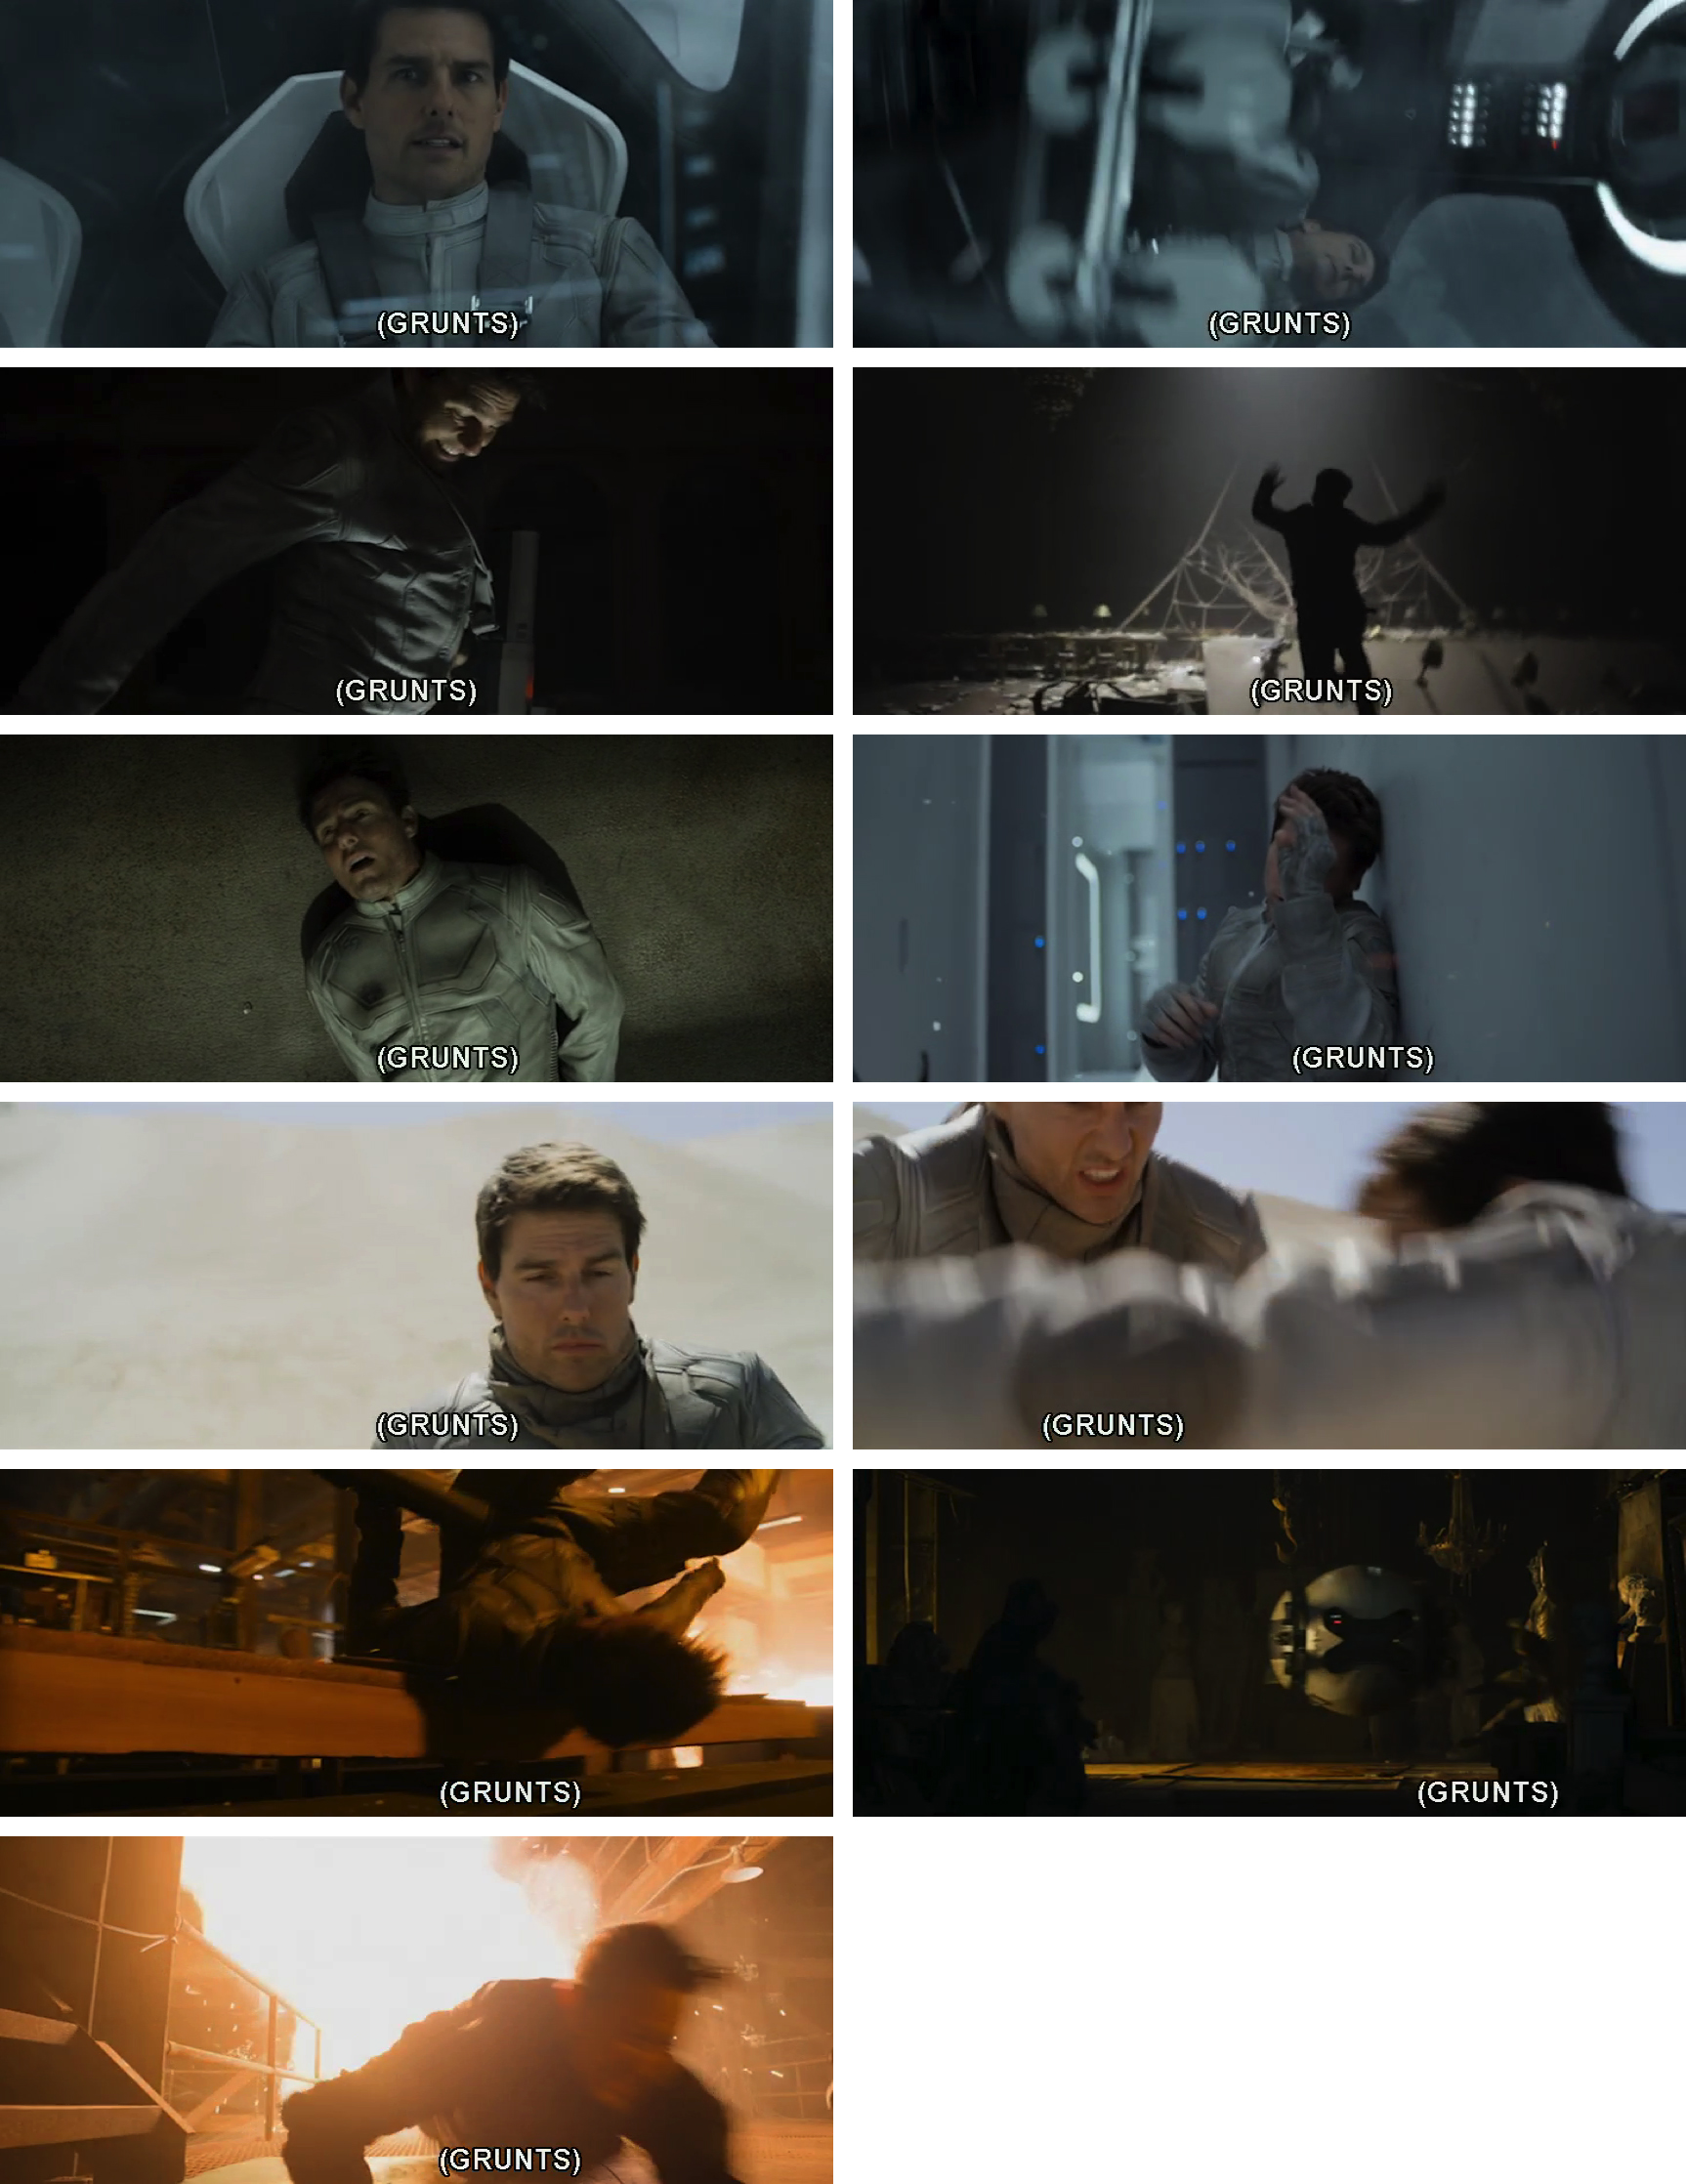 A collage of eleven grunt captions from Oblivion. All of the grunt captions are attributed to men. Nine of the grunt captions are attributed to Tom Cruise specifically.